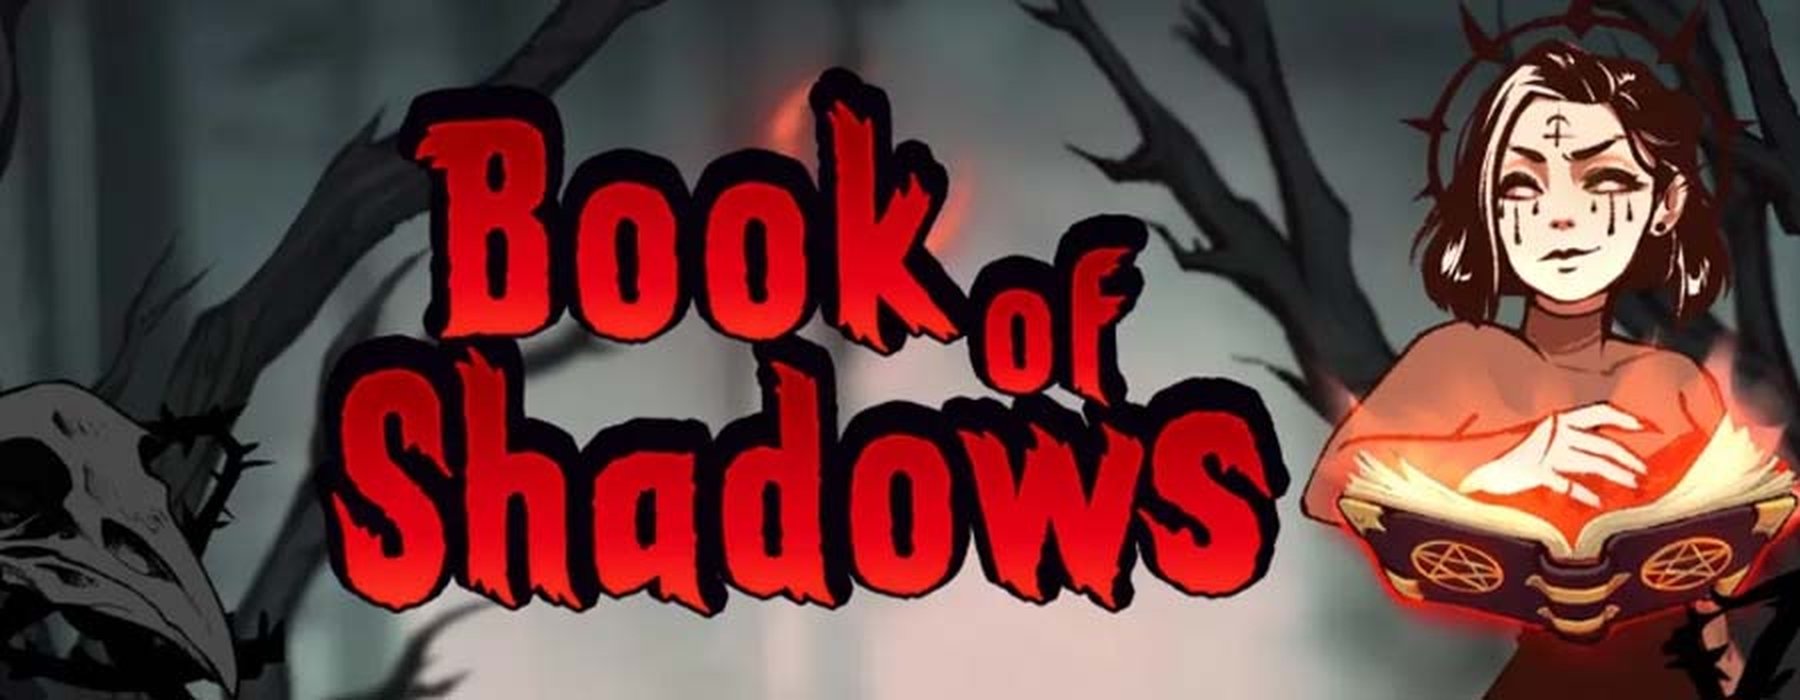 The Book of Shadows Online Slot Demo Game by Nolimit City